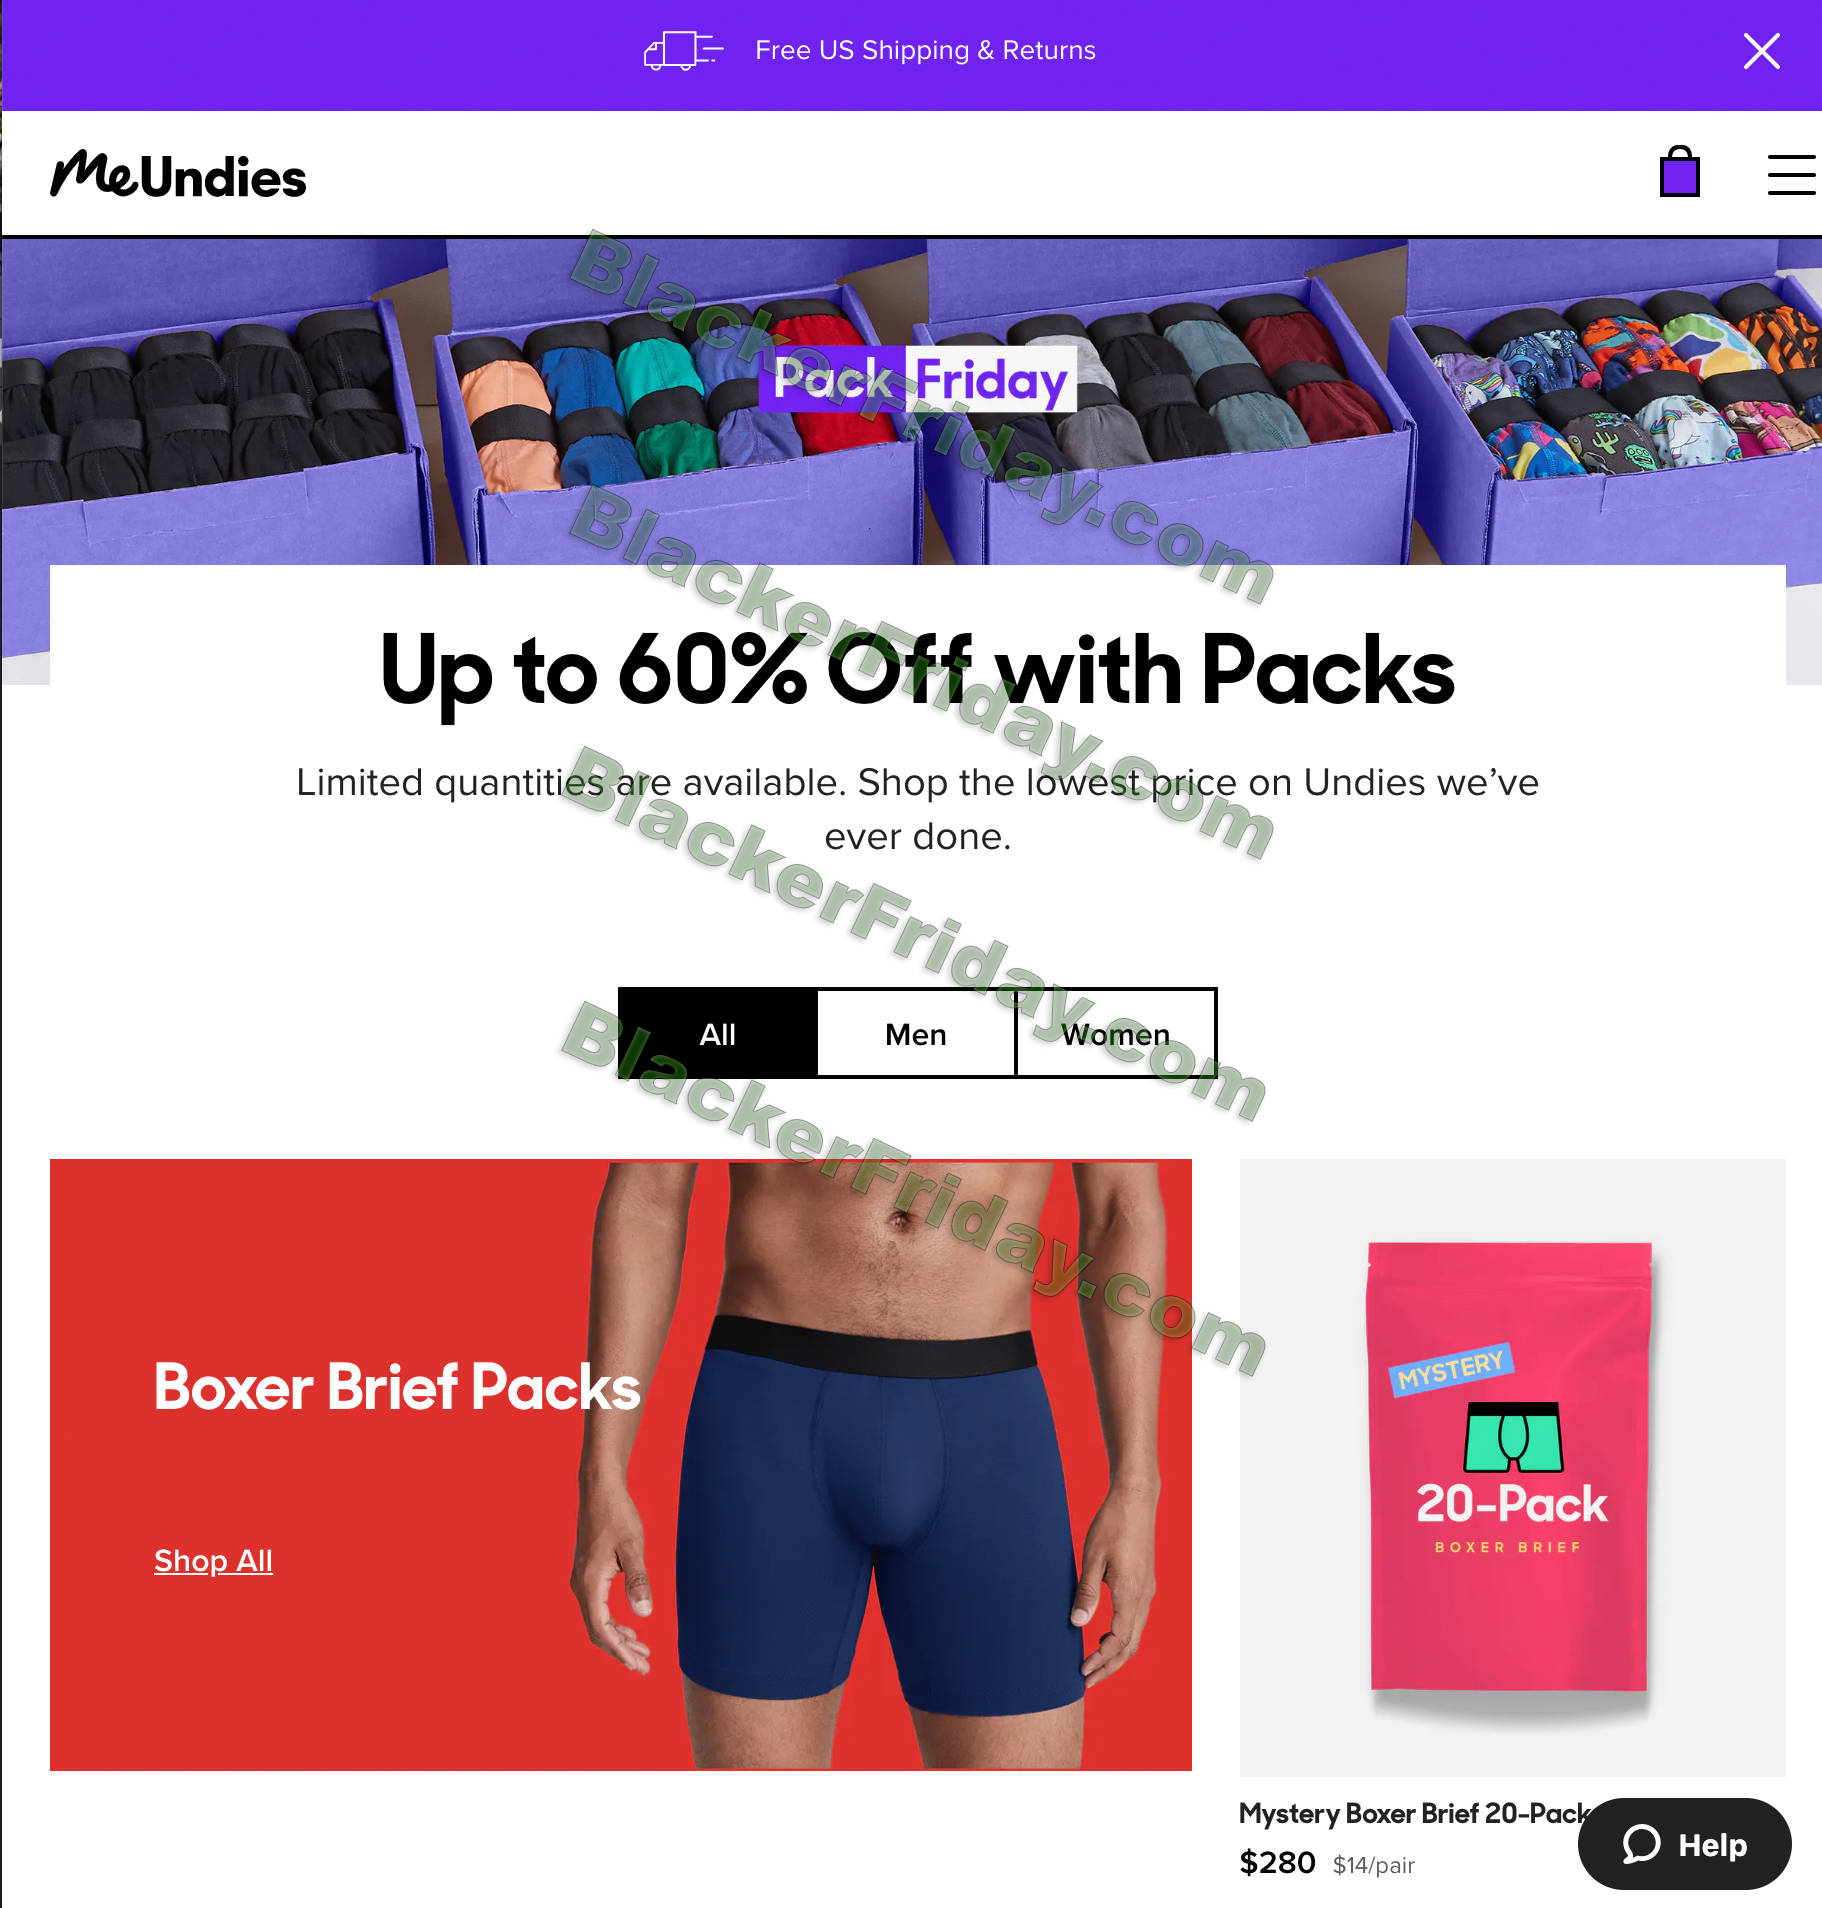 MeUndies Black Friday 2021 Sale What to Expect Blacker Friday